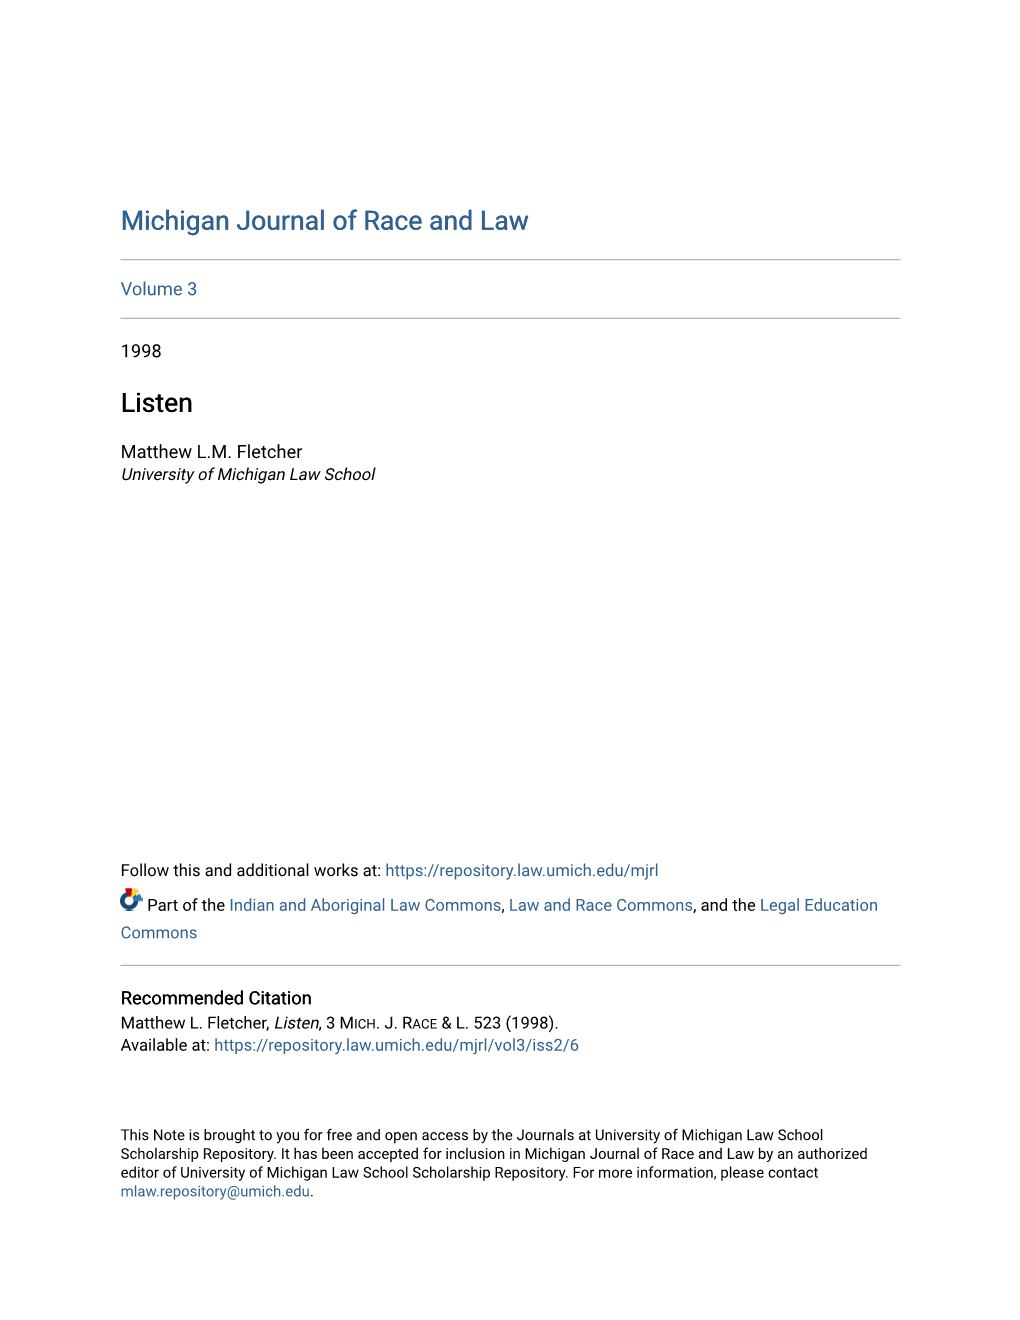 Michigan Journal of Race and Law Listen